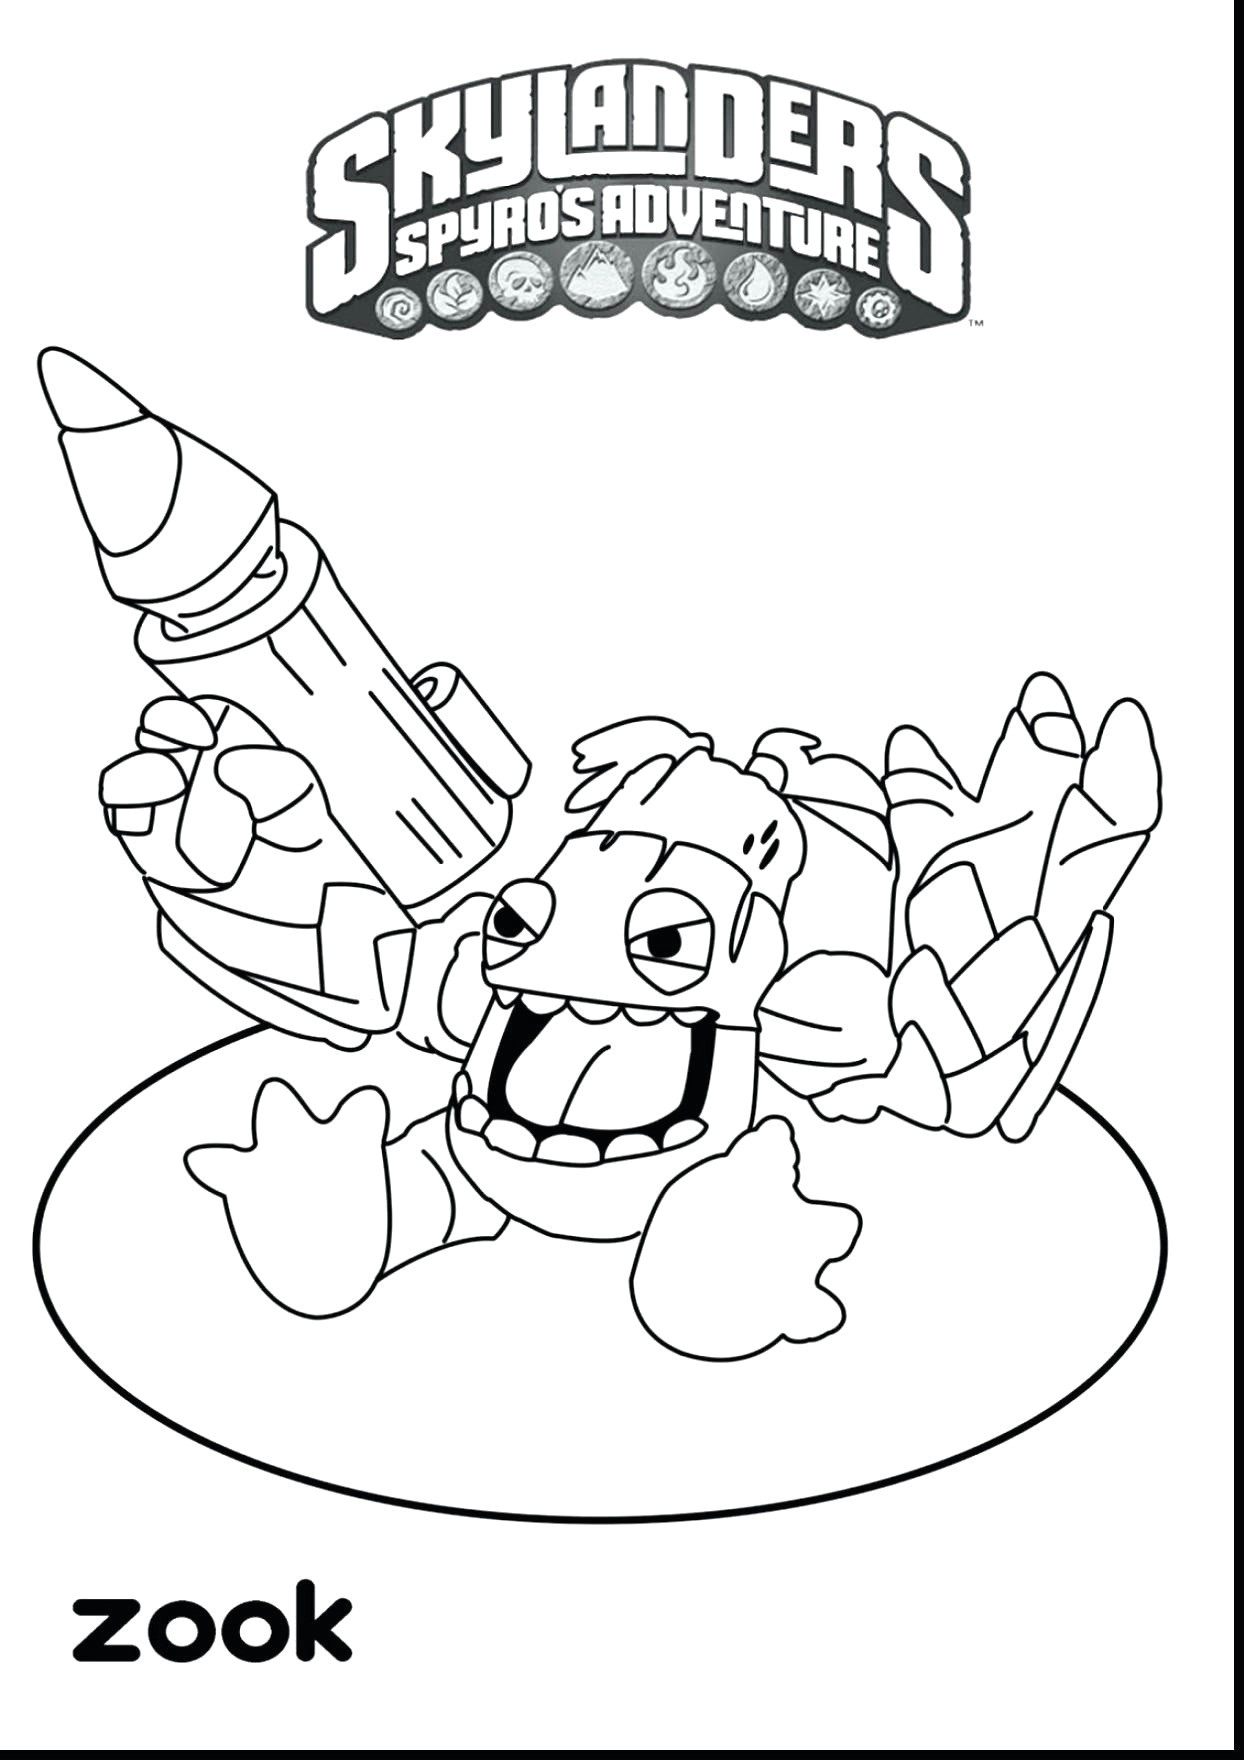 Drawing Simple Cartoon Noses Www Colouring Pages Brilliant Easy to Draw Instruments Home Coloring